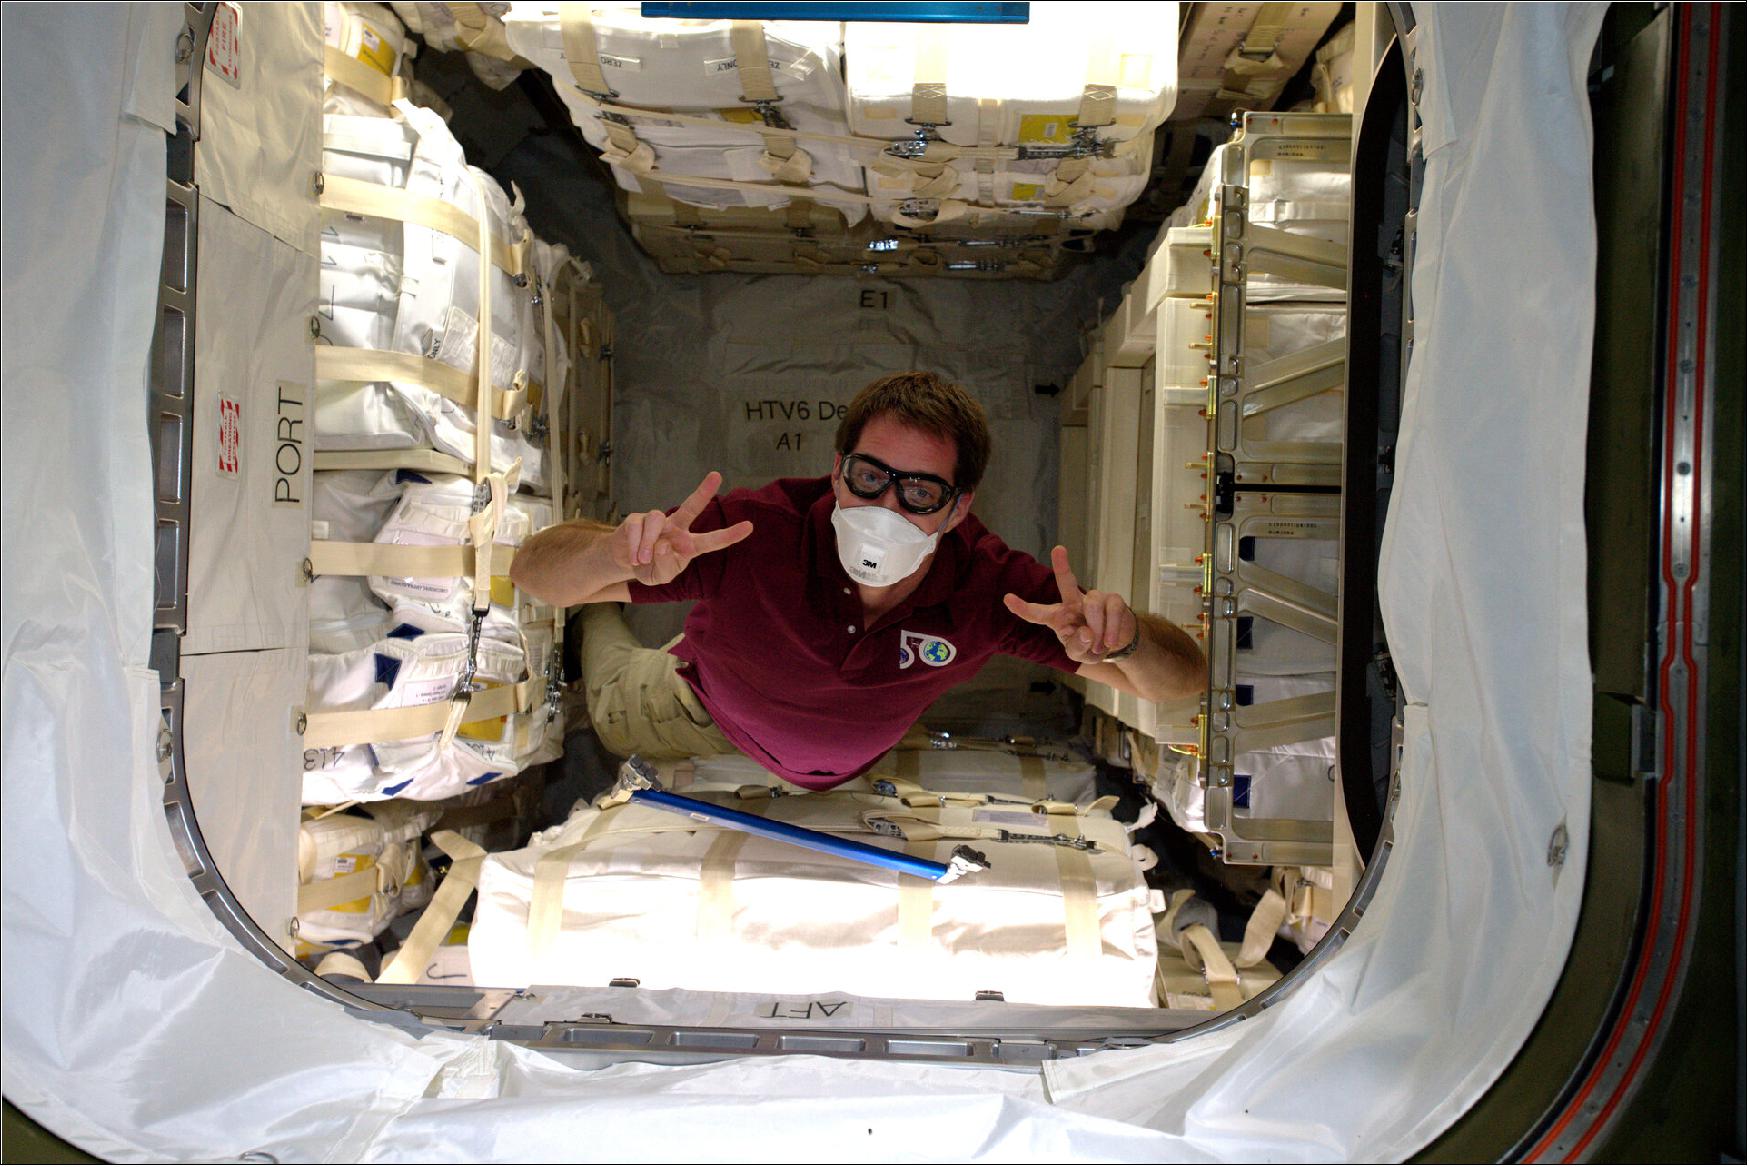 Figure 75: Thomas wrote this caption for the image: "This is what the inside of the HTV looks like. 2600 kg of science, equipment and supplies, very neatly packed and strapped to resist a launch to space! For first ingress into a cargo vehicle – after we equalize the pressure and open the hatch – we always wear a mask and take samples of the atmosphere. Safety first! Some dust or small debris could have gotten loose and become a hazard for the crew, and the atmosphere might be somehow polluted. Not the case with our pristine HTV-6!"(image credit: ESA/NASA)